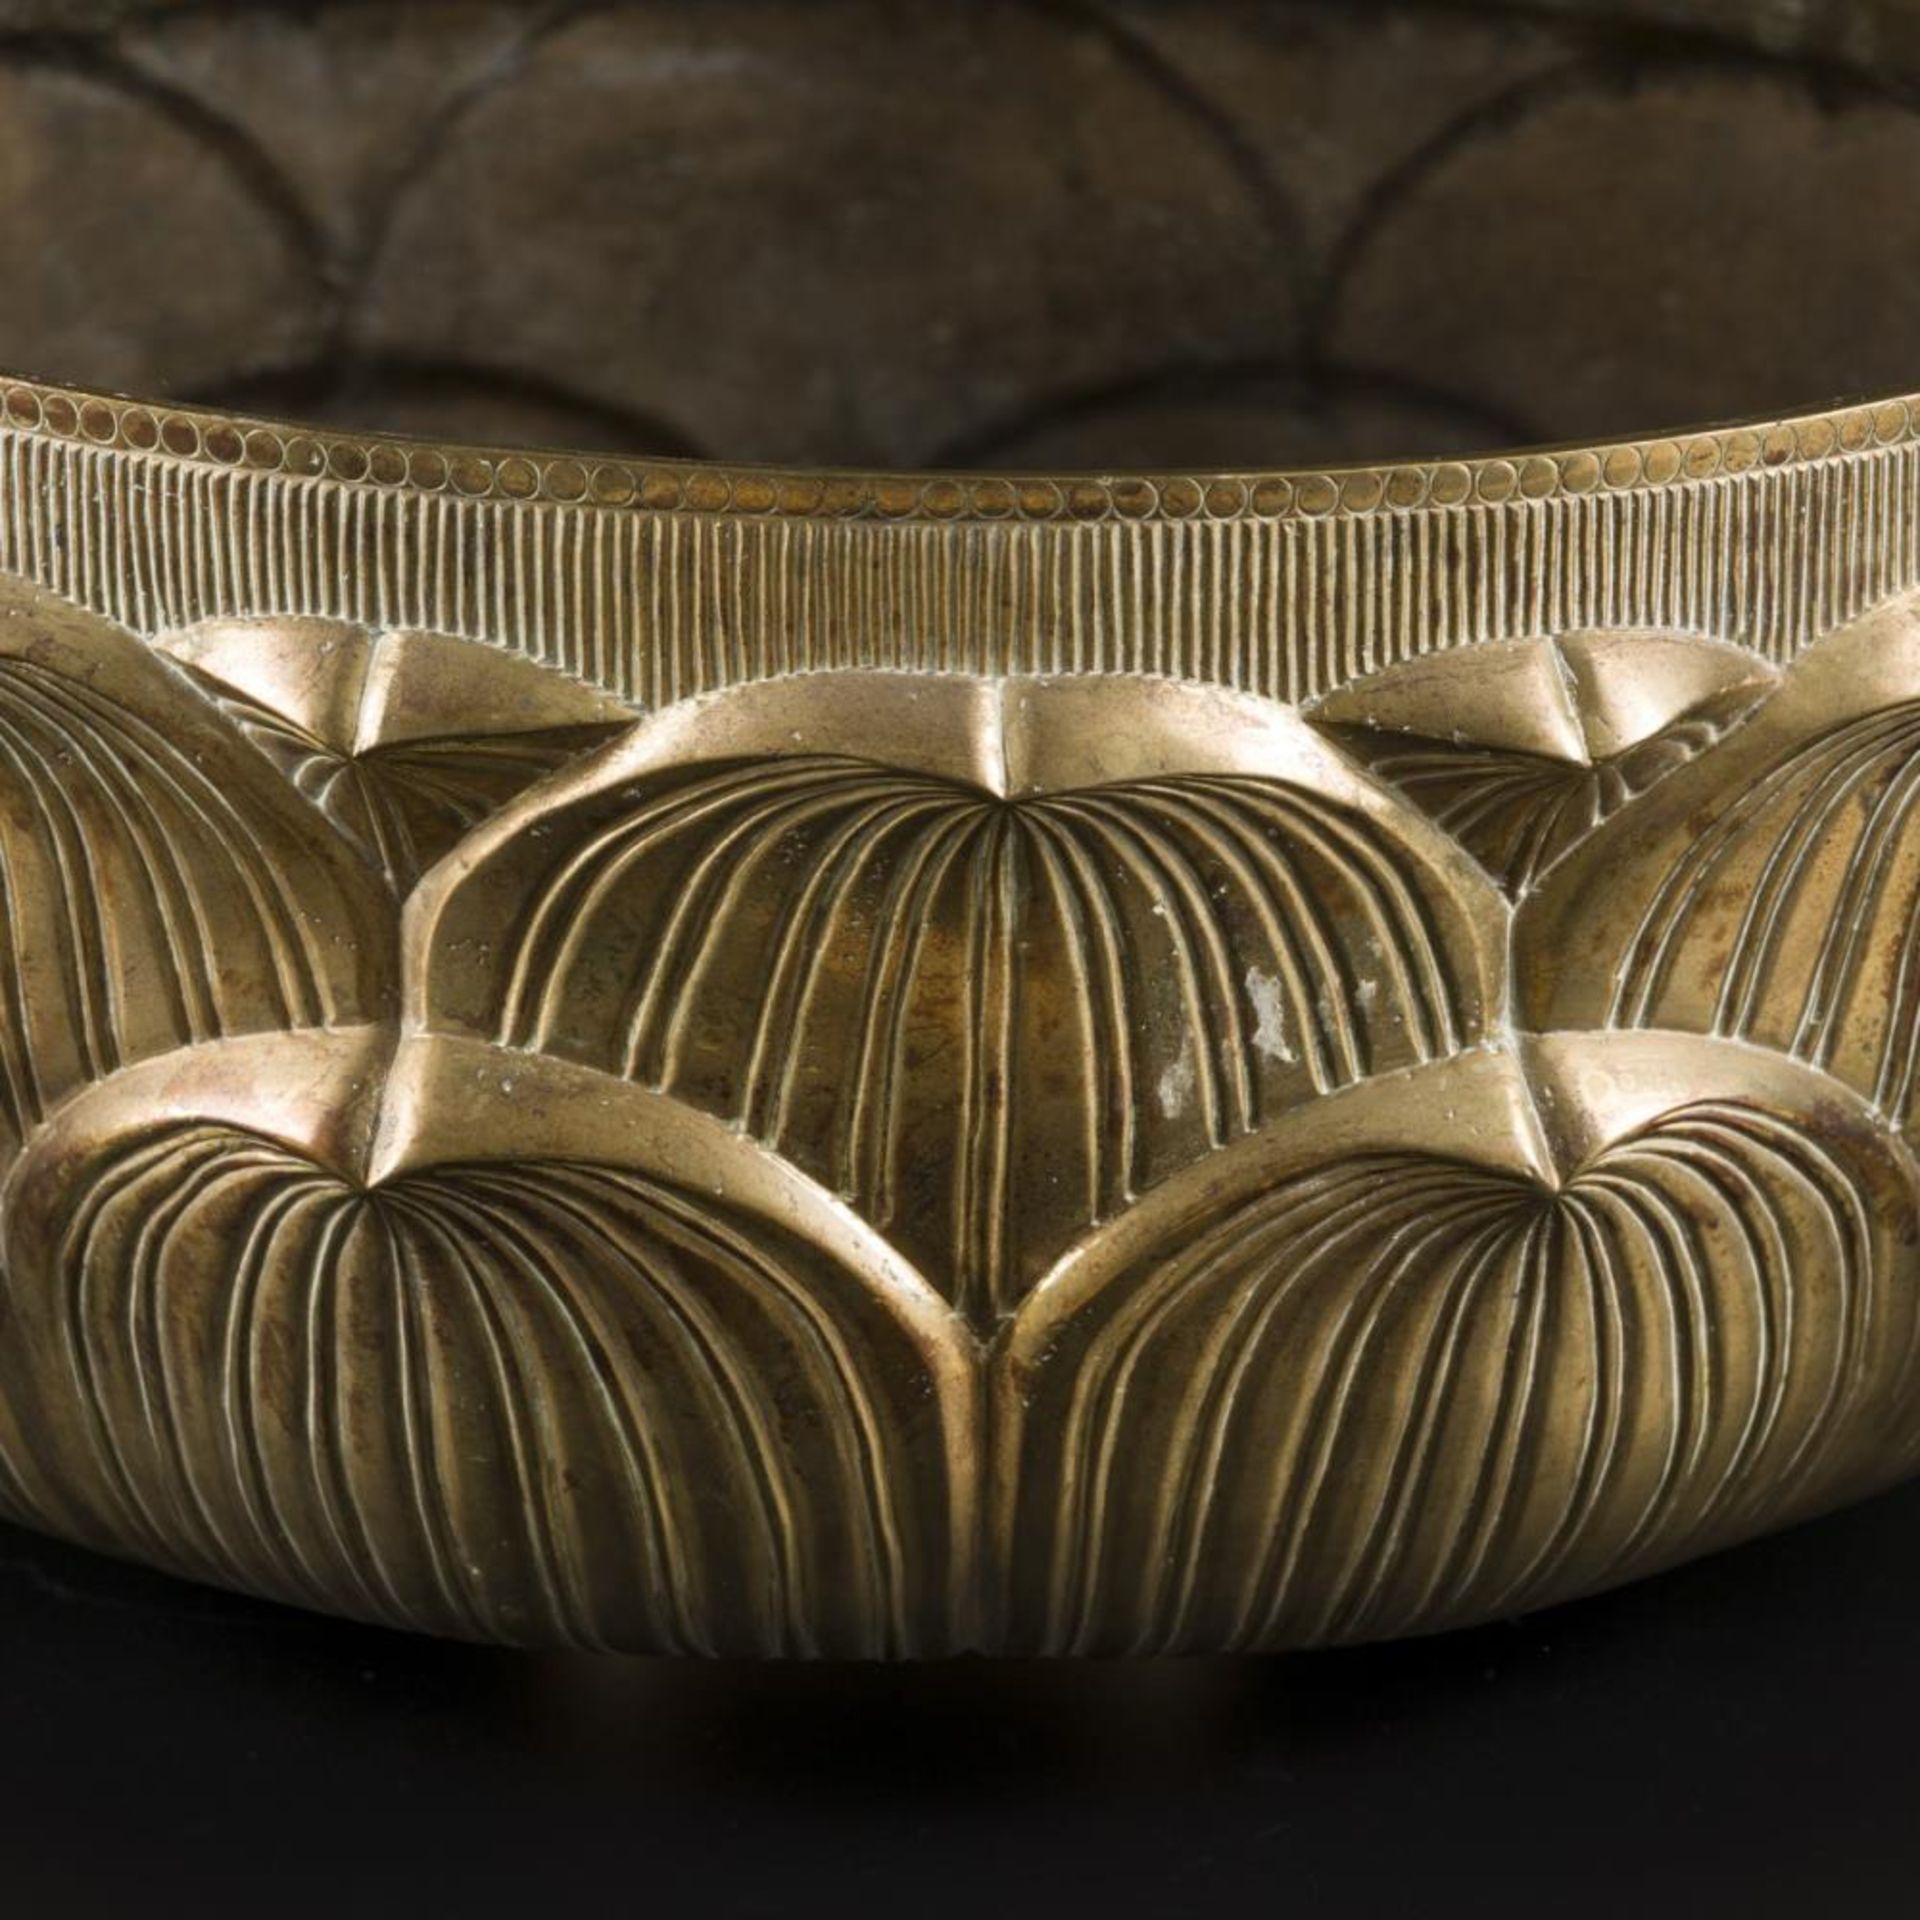 A brass lotus-shaped bowl, China, early 20th century. - Image 5 of 6